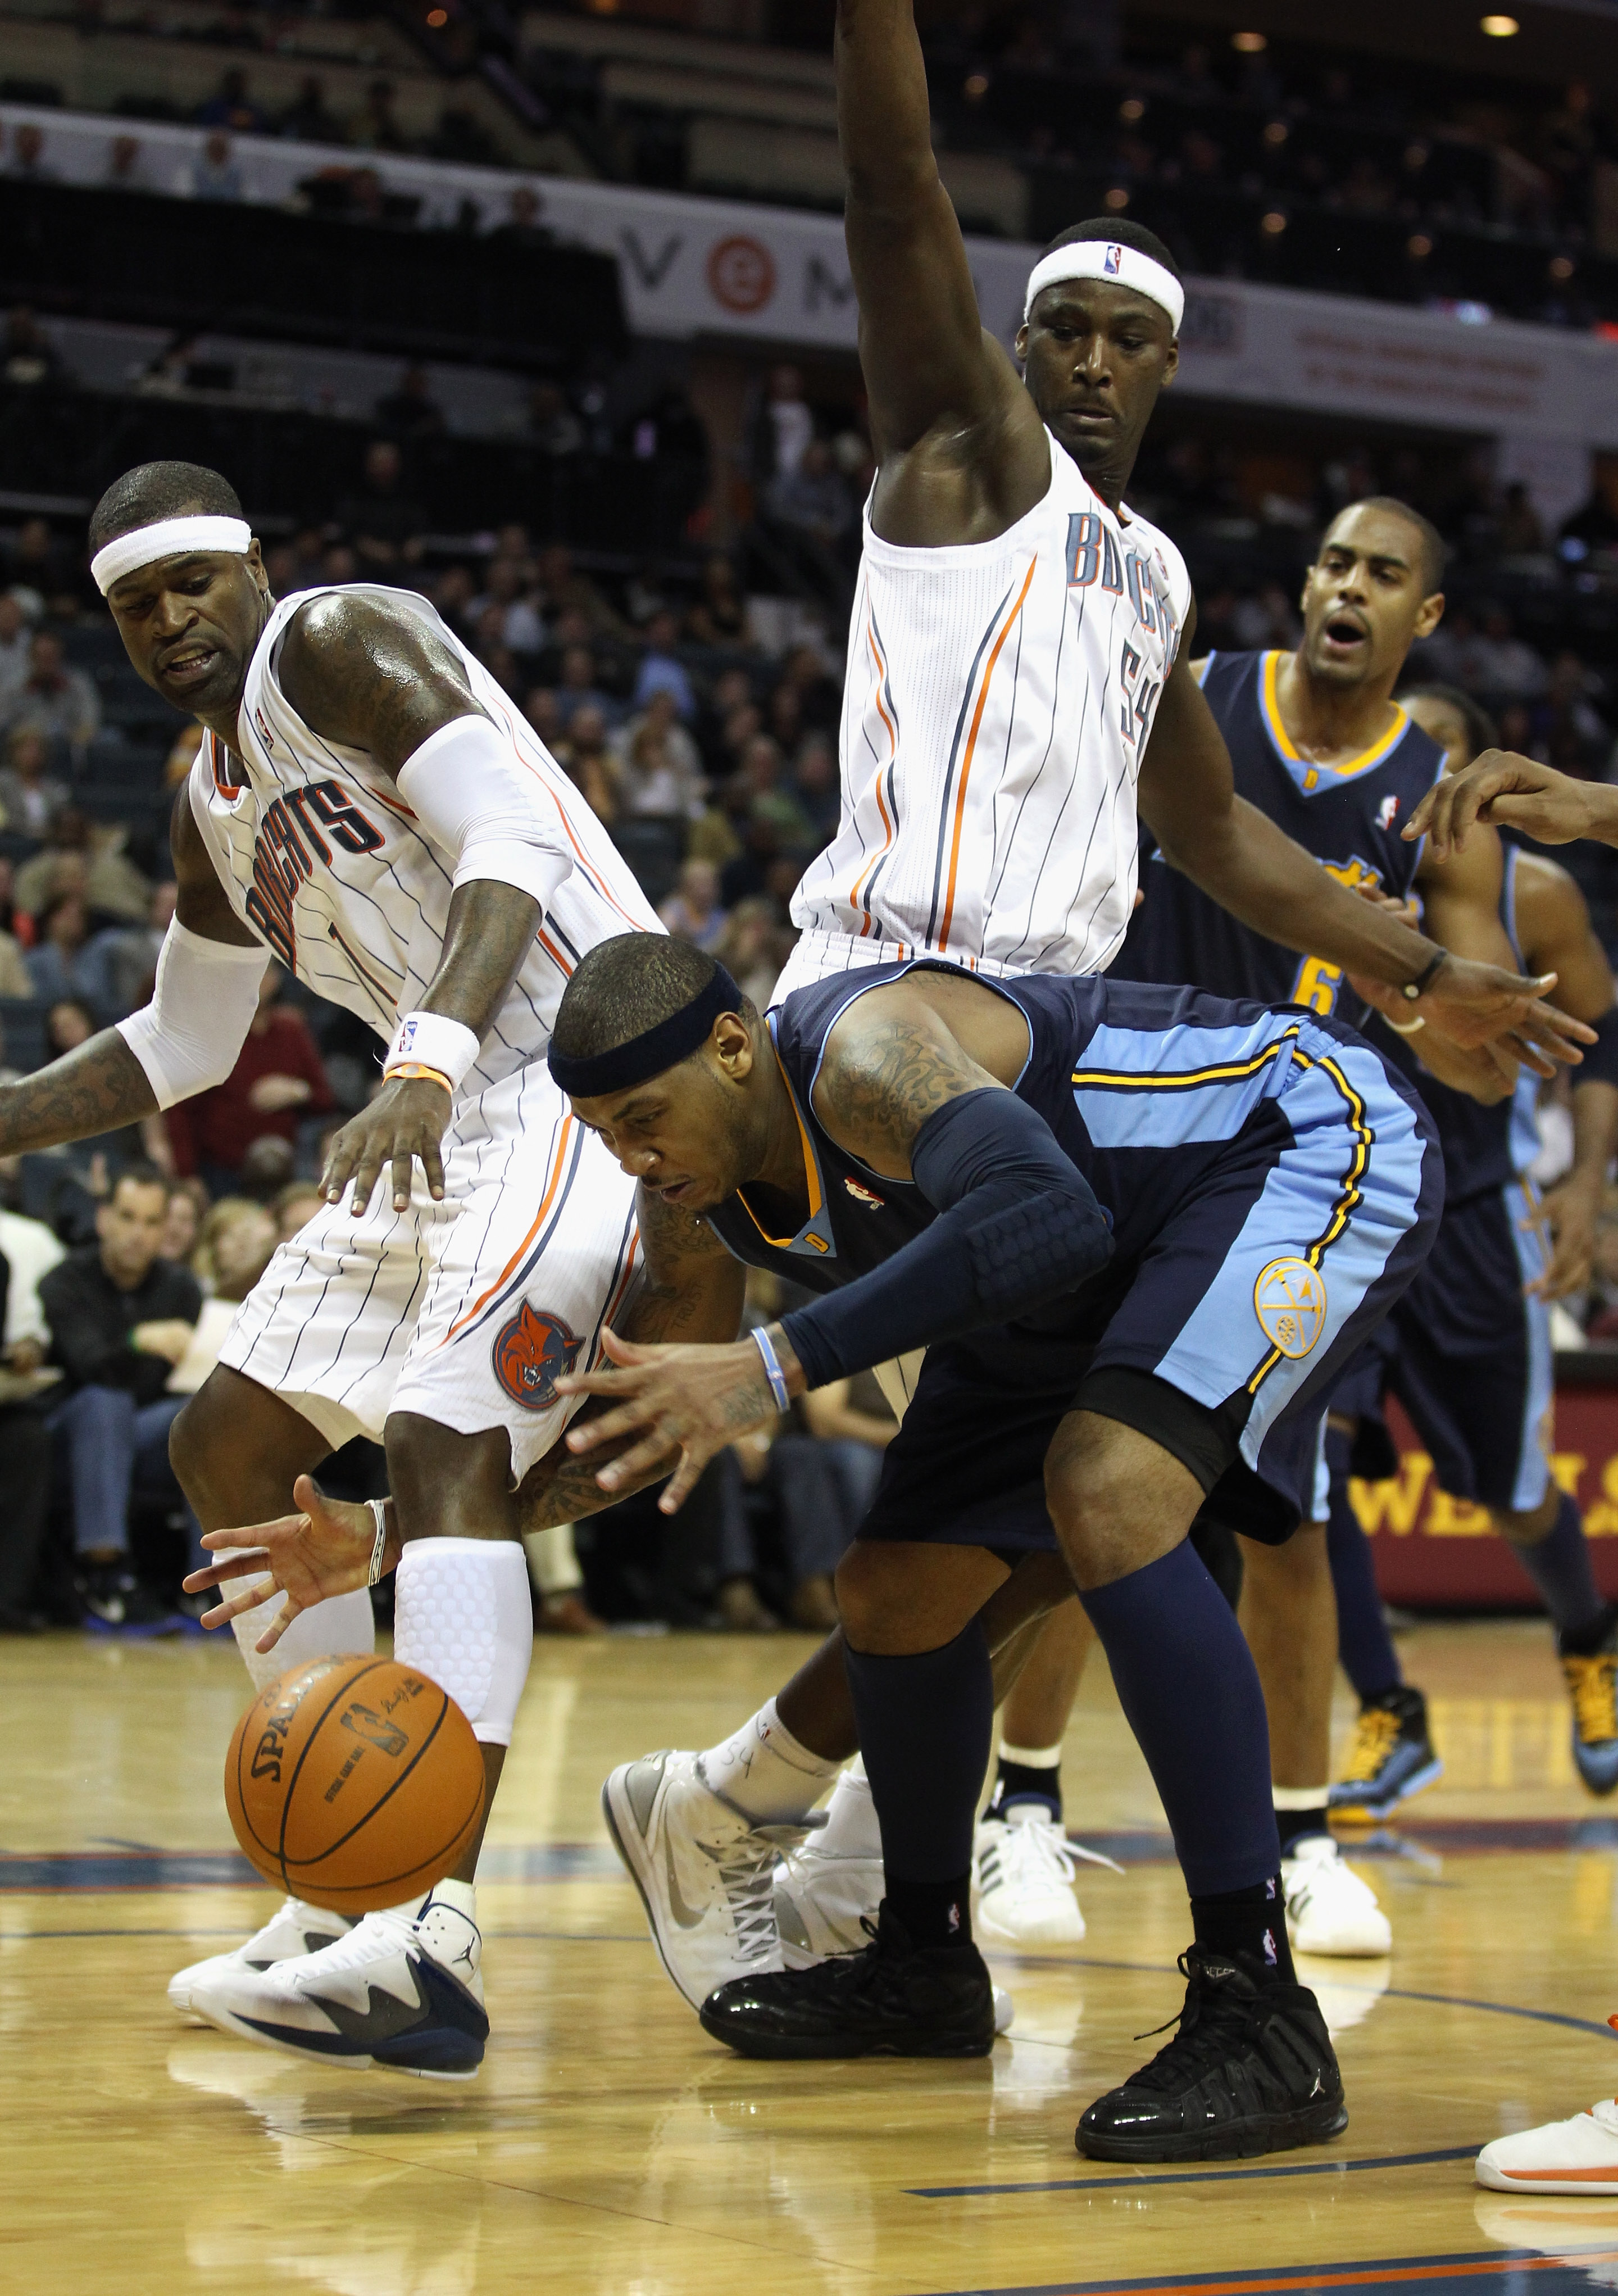 CHARLOTTE, NC - DECEMBER 07:  Carmelo Anthony #15 of the Denver Nuggets battles for a loose ball with Stephen Jackson #1 of the Charlotte Bobcats during their game at Time Warner Cable Arena on December 7, 2010 in Charlotte, North Carolina.  NOTE TO USER: